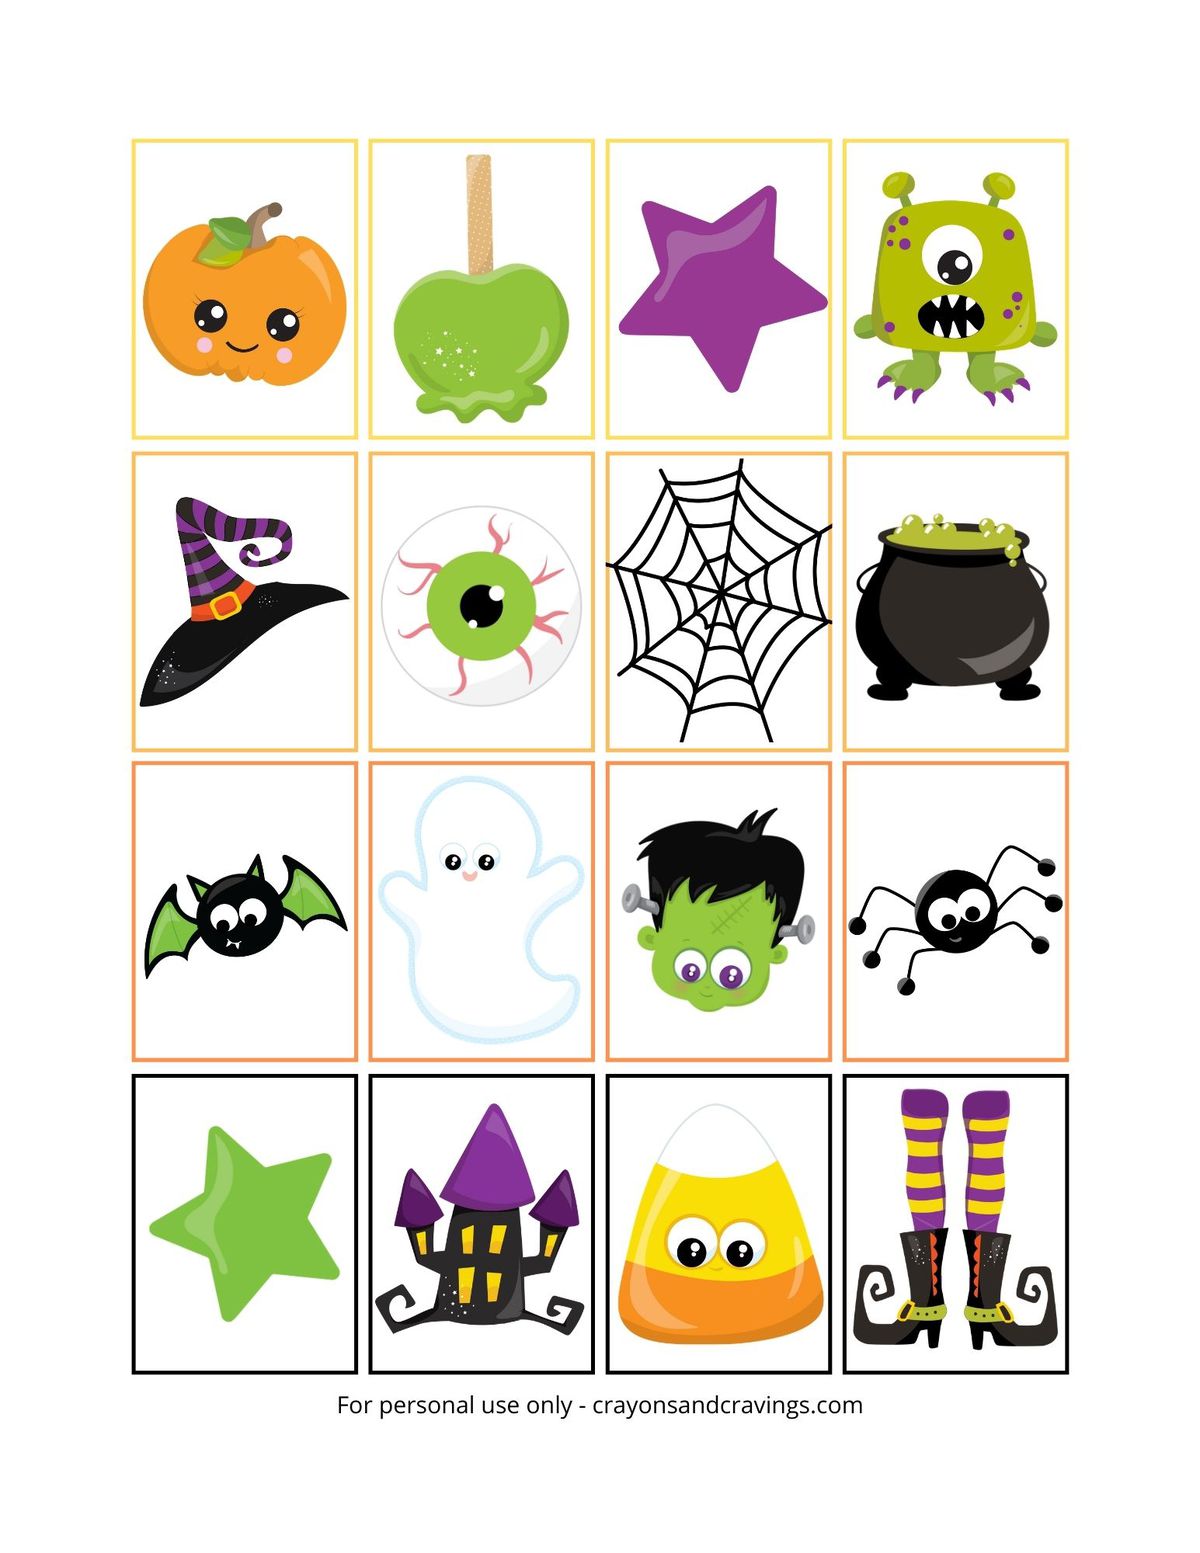 Halloween Memory Game printable with 16 rectangular cards featuring cute halloween graphics.